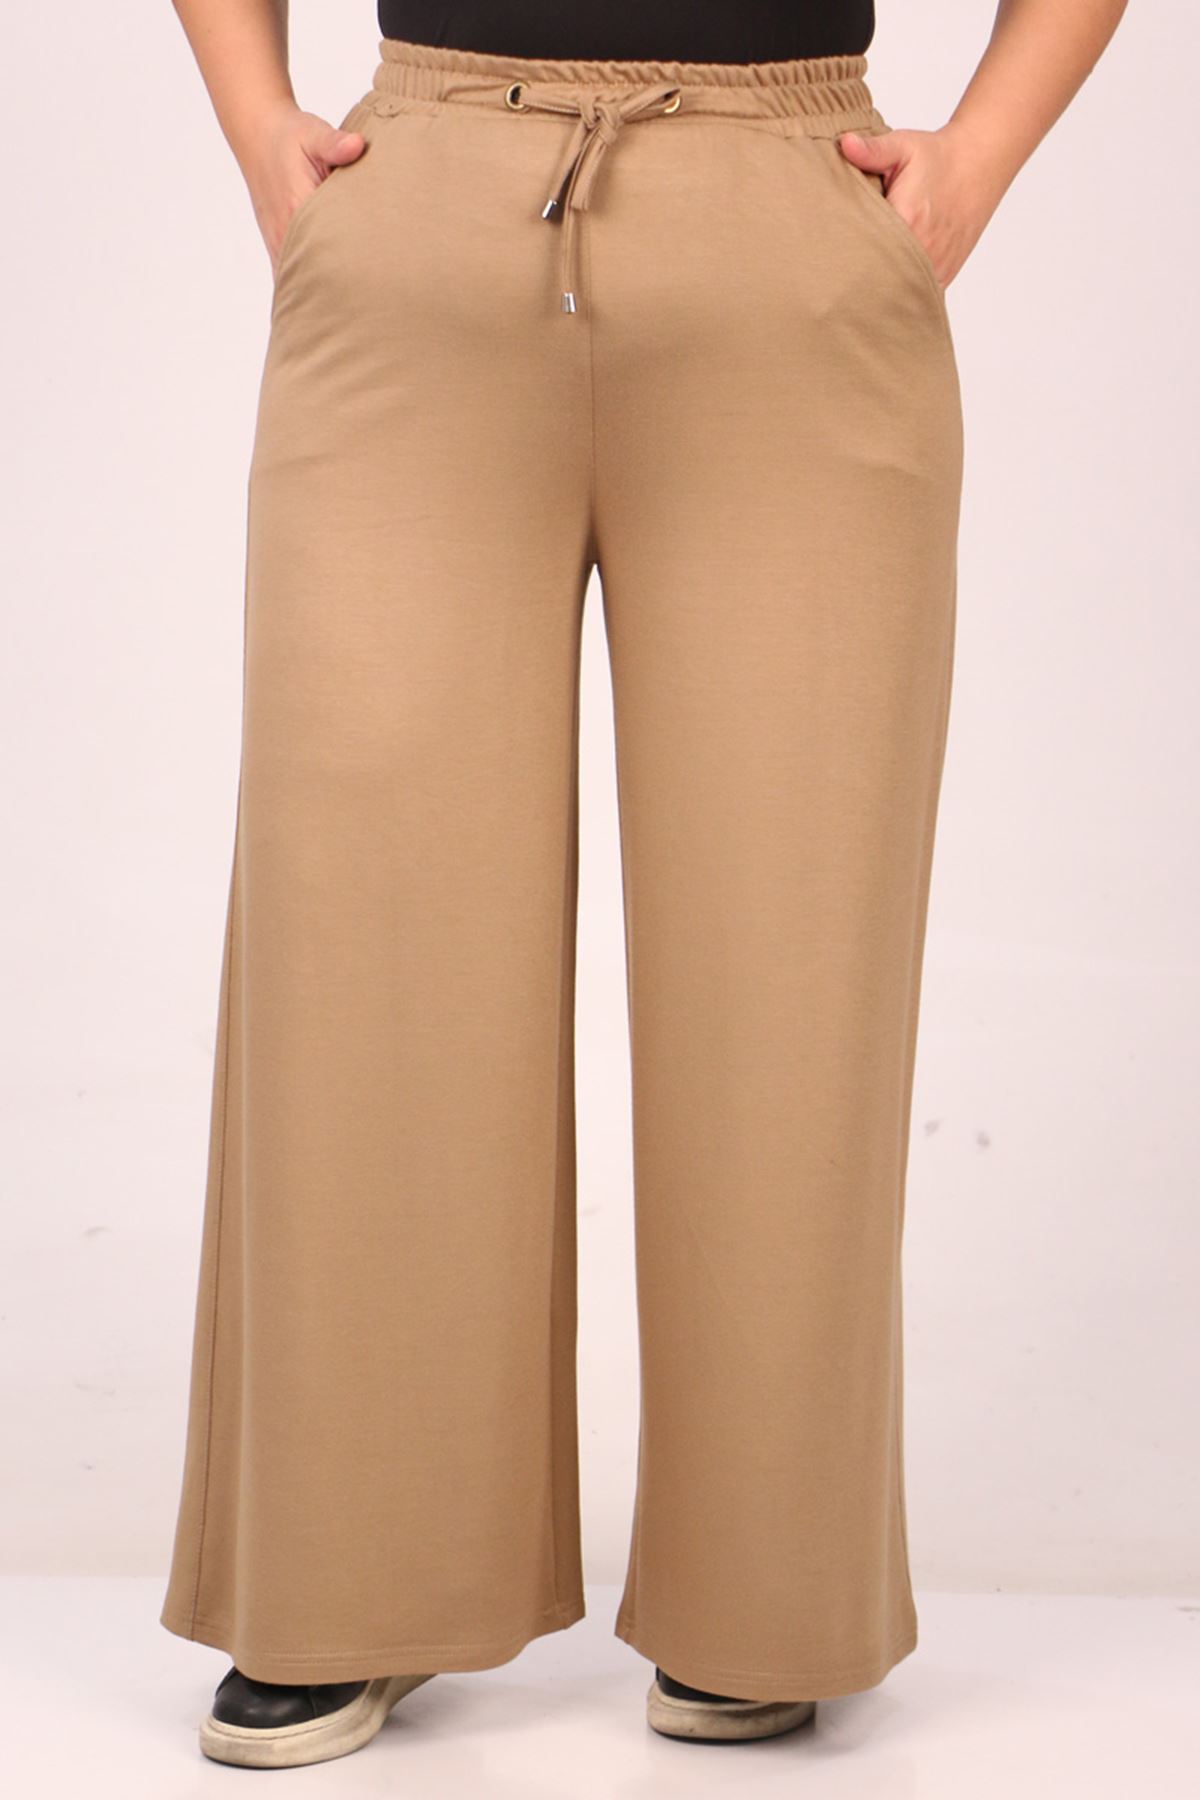 39502 Large Size Crystal Two Thread Trousers with Elastic Back - Mink